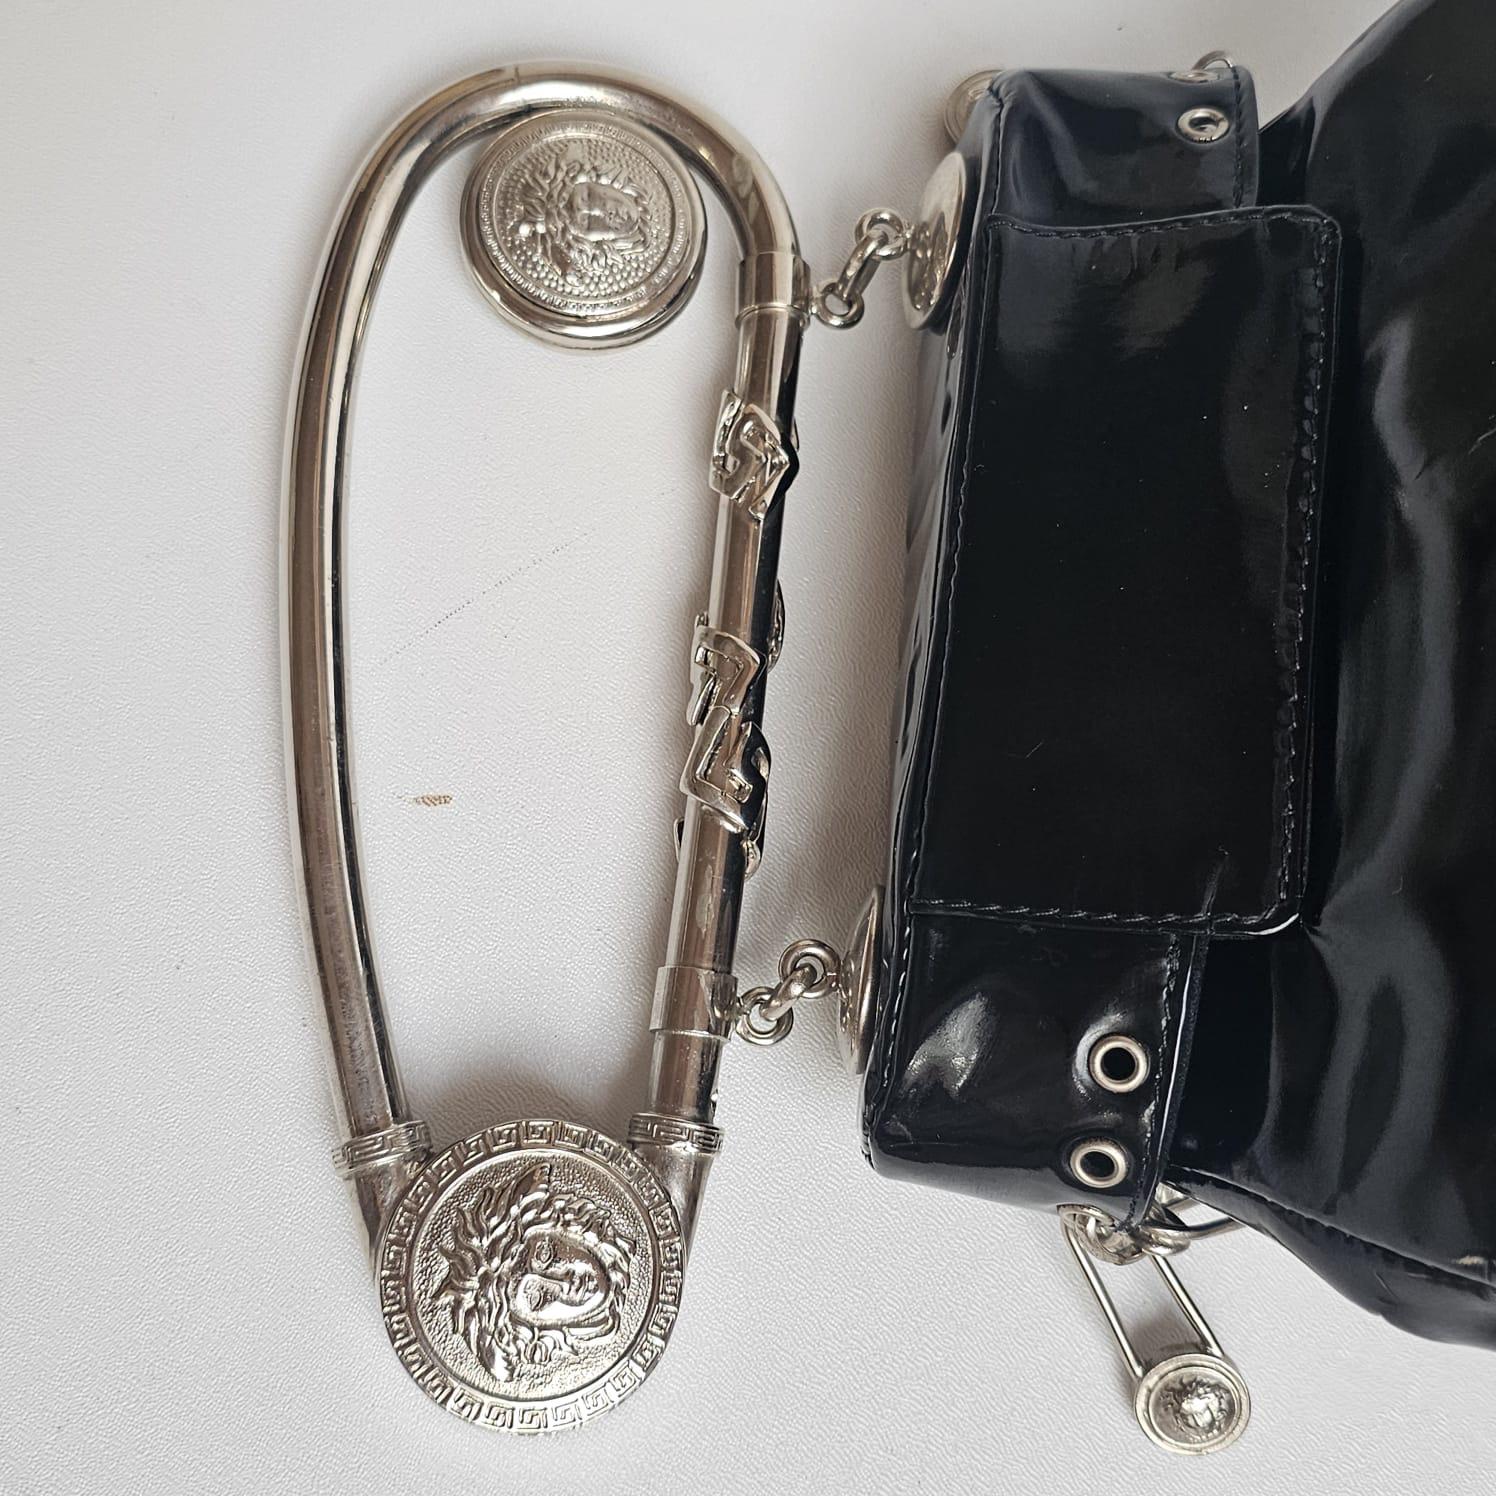 Archival Versace piece from 1994 collection. Item shows slight marks on the patent leather as seen on pictures due to storage. Slight cloudiness throughout the patent surface and minor crack on the buckle closure area but nothing significant. Faint